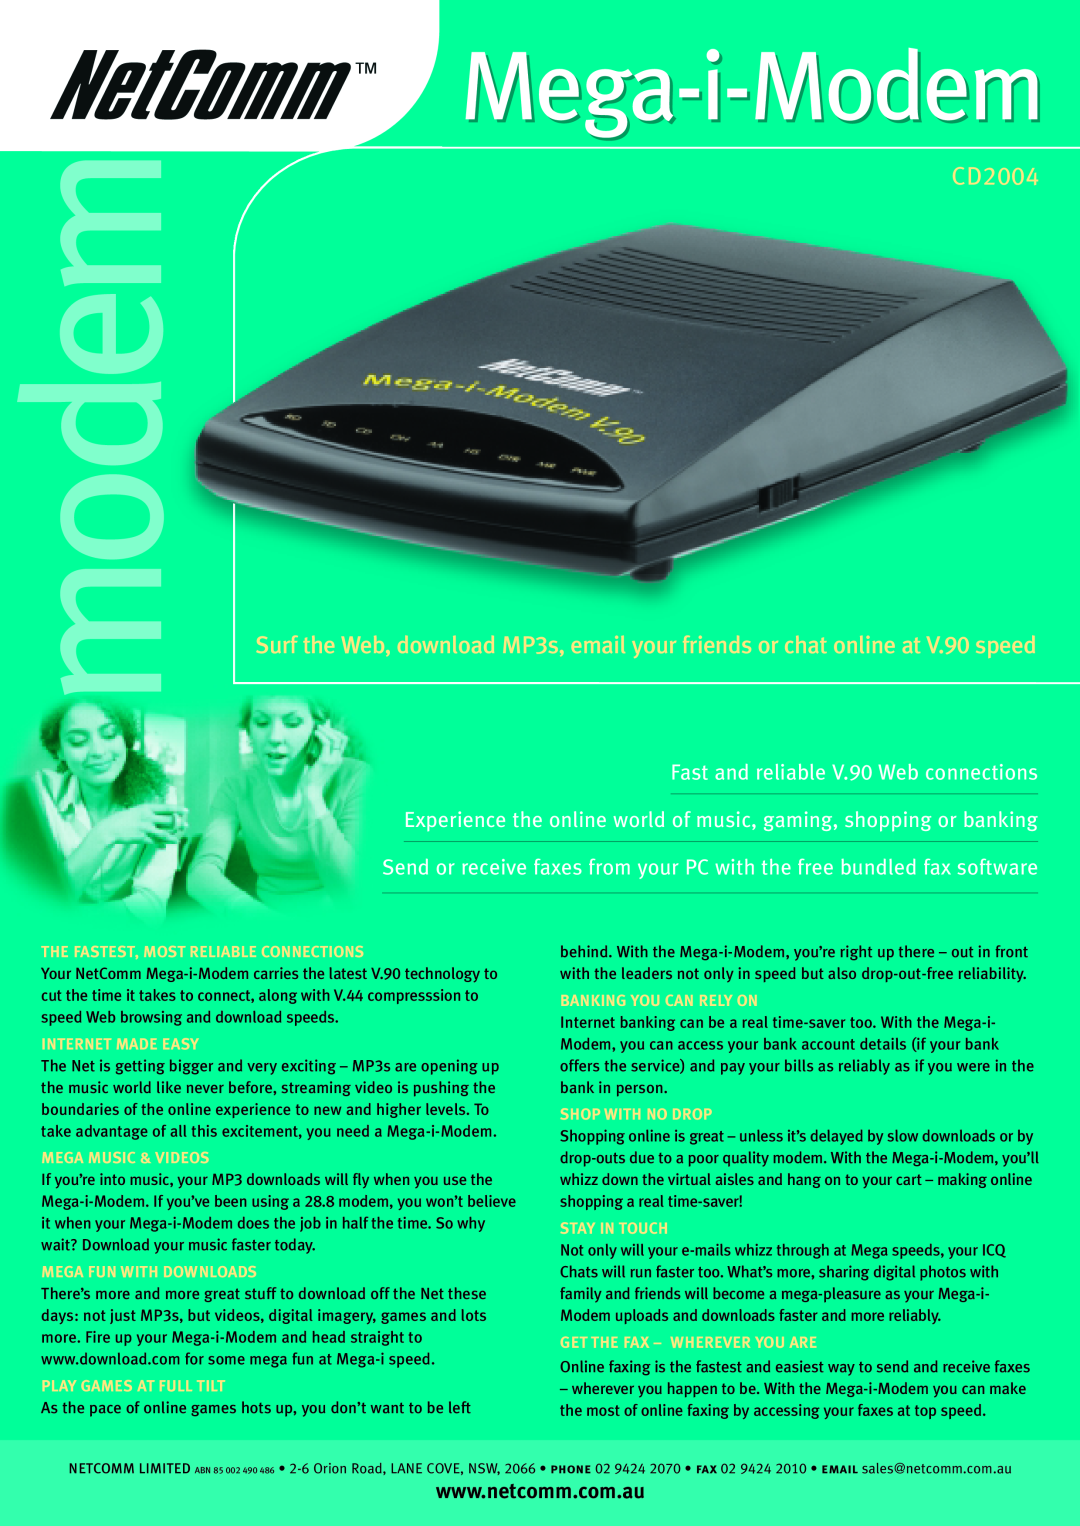 NetComm CD 2004 manual modem, Mega-i-Modem, CD2004, The Fastest, Most Reliable Connections, Internet Made Easy 